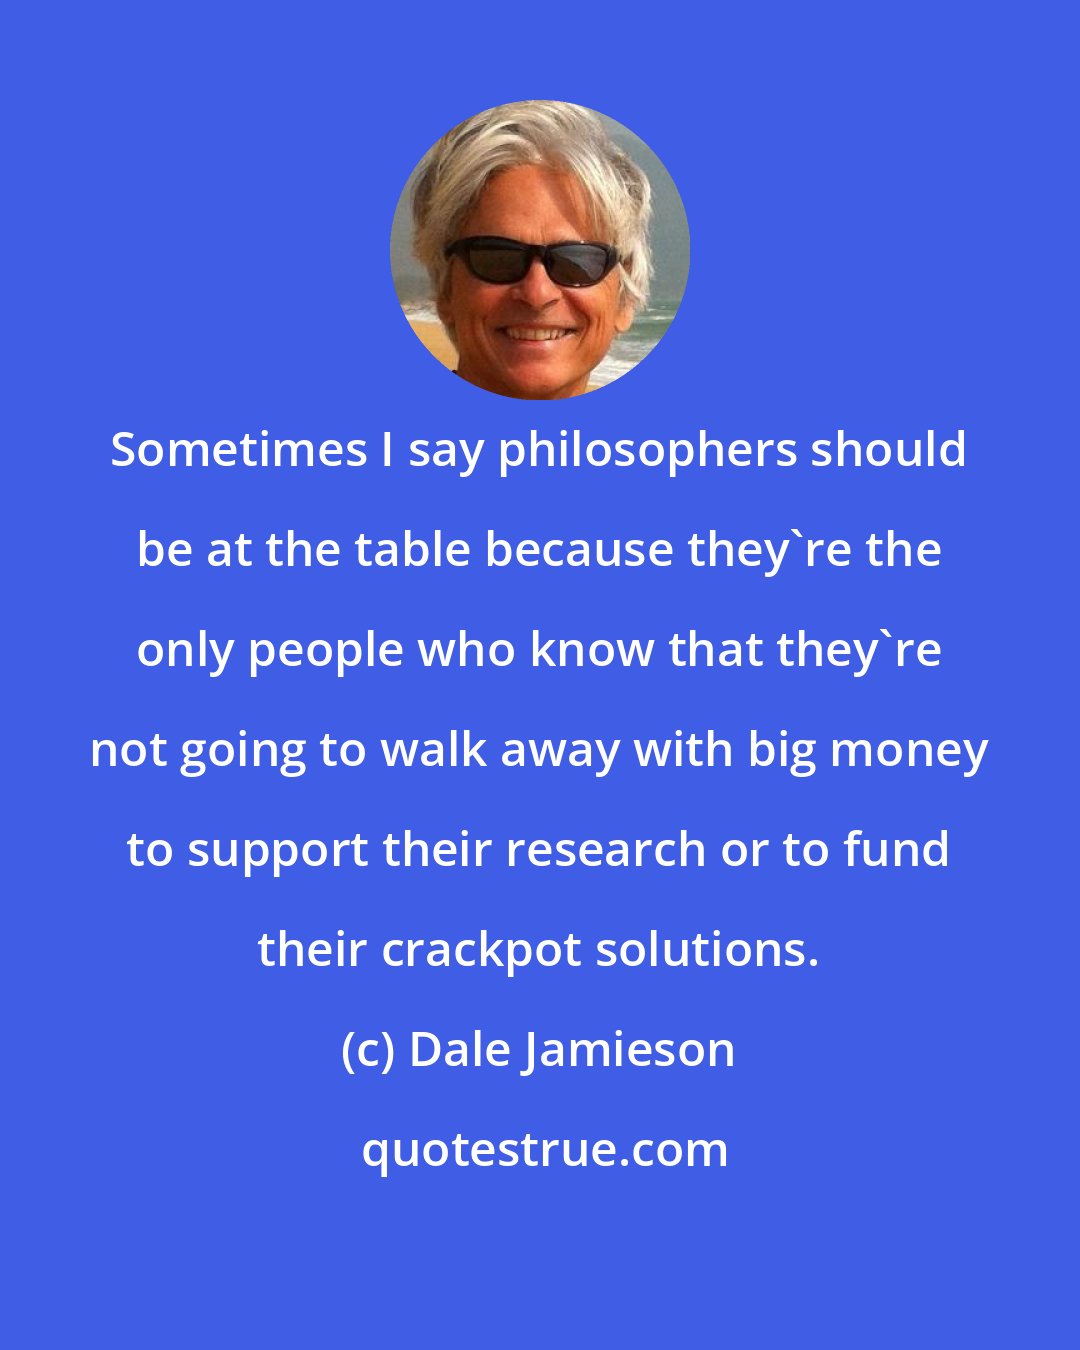 Dale Jamieson: Sometimes I say philosophers should be at the table because they're the only people who know that they're not going to walk away with big money to support their research or to fund their crackpot solutions.